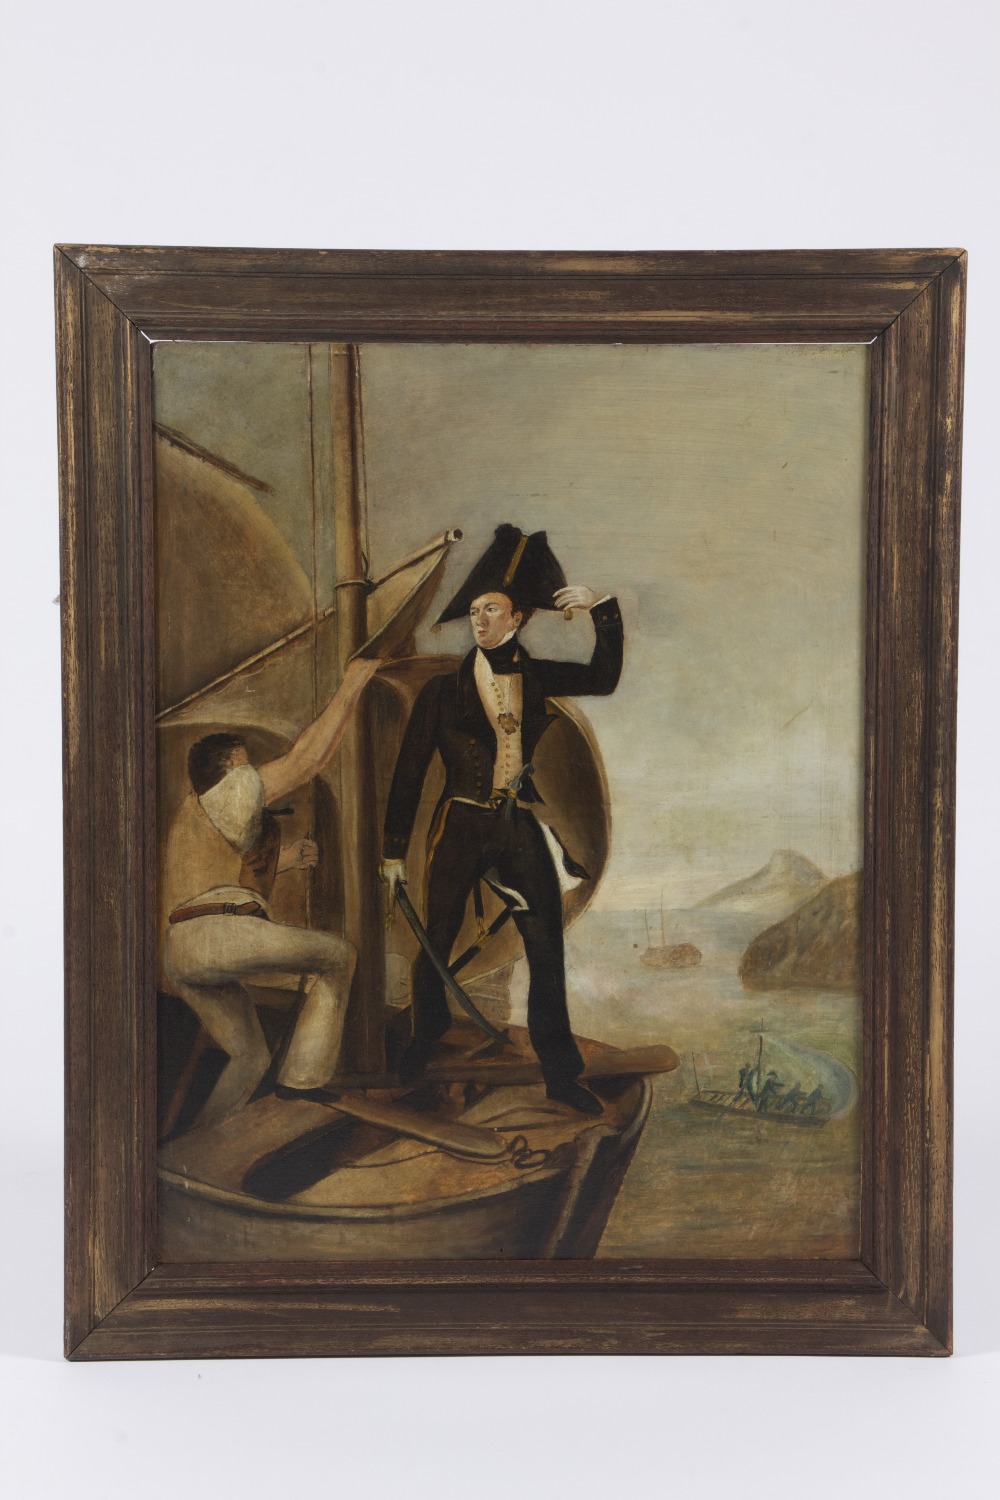 Oil on board depicting early 19th century naval explorers finding new land, 38 x 49 cm.